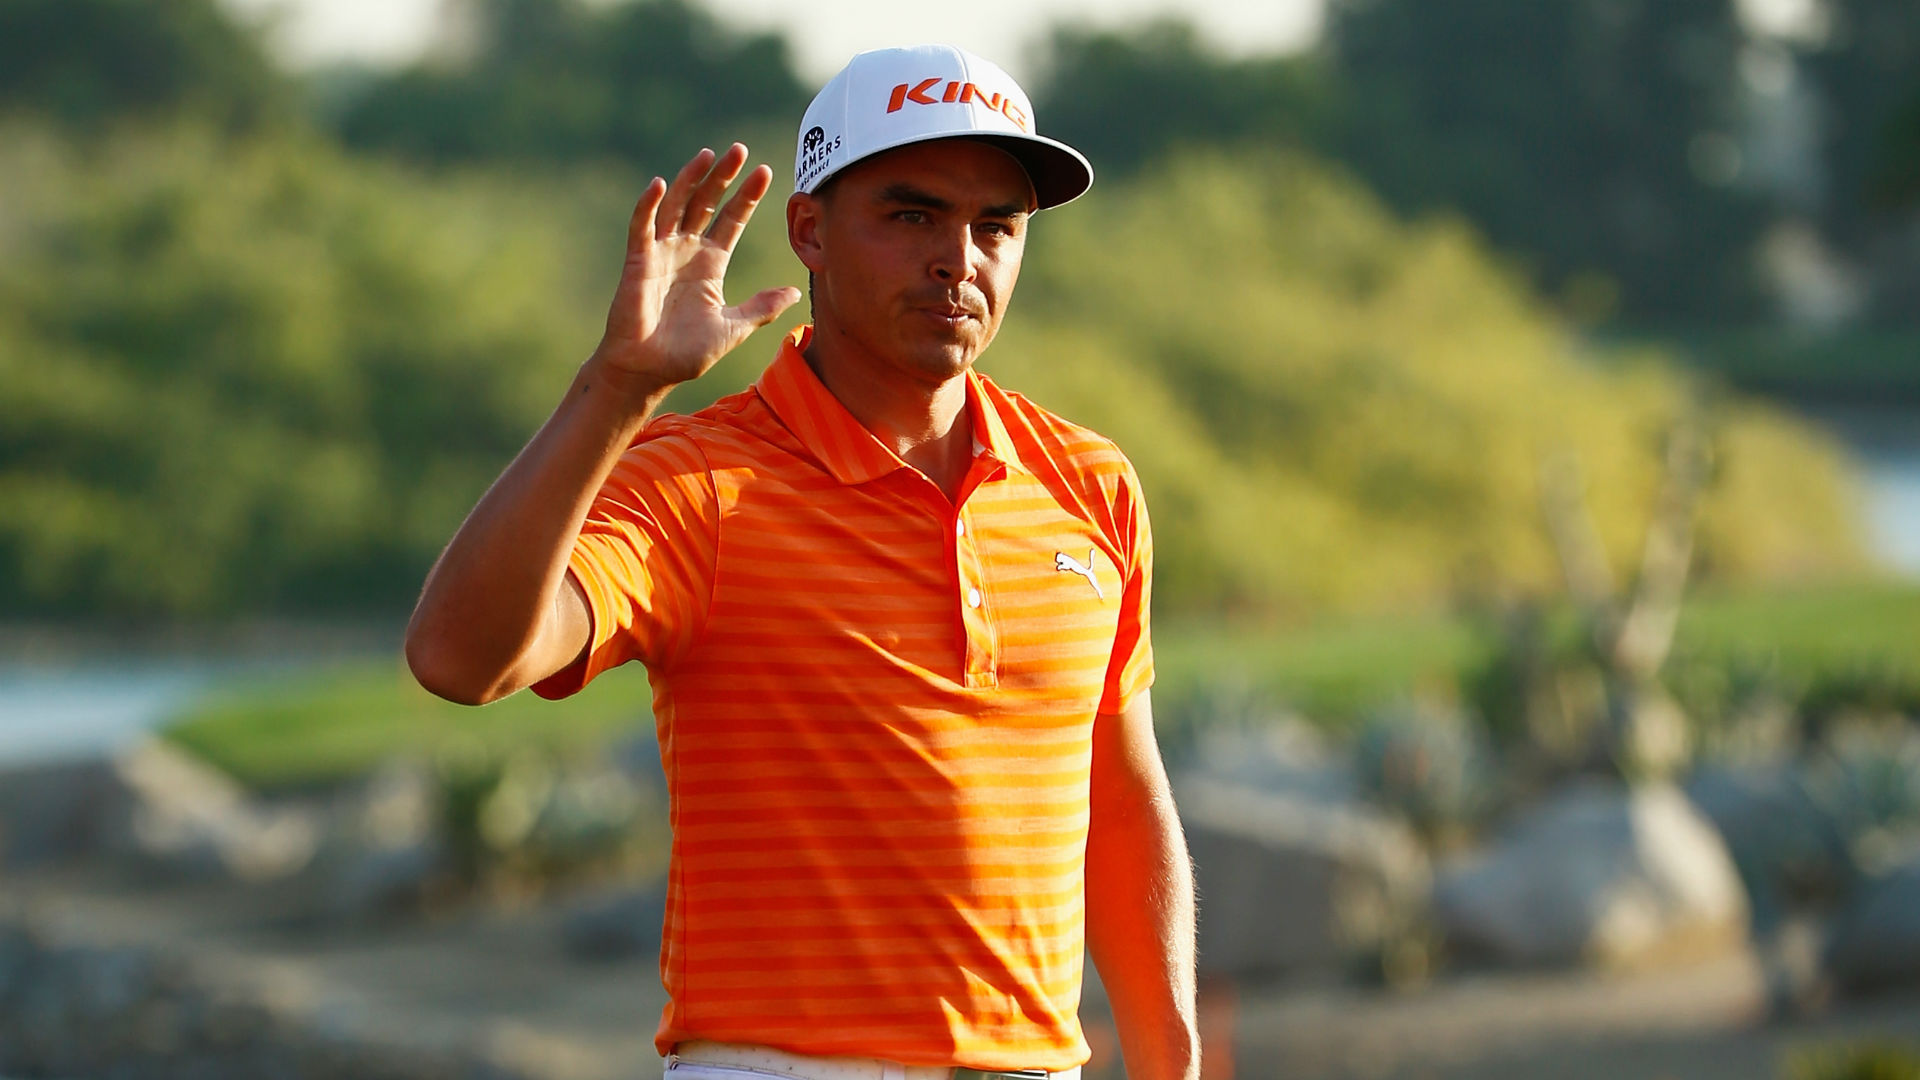 Rickie Fowler fends off Rory McIlroy to win Abu Dhabi HSBC Golf